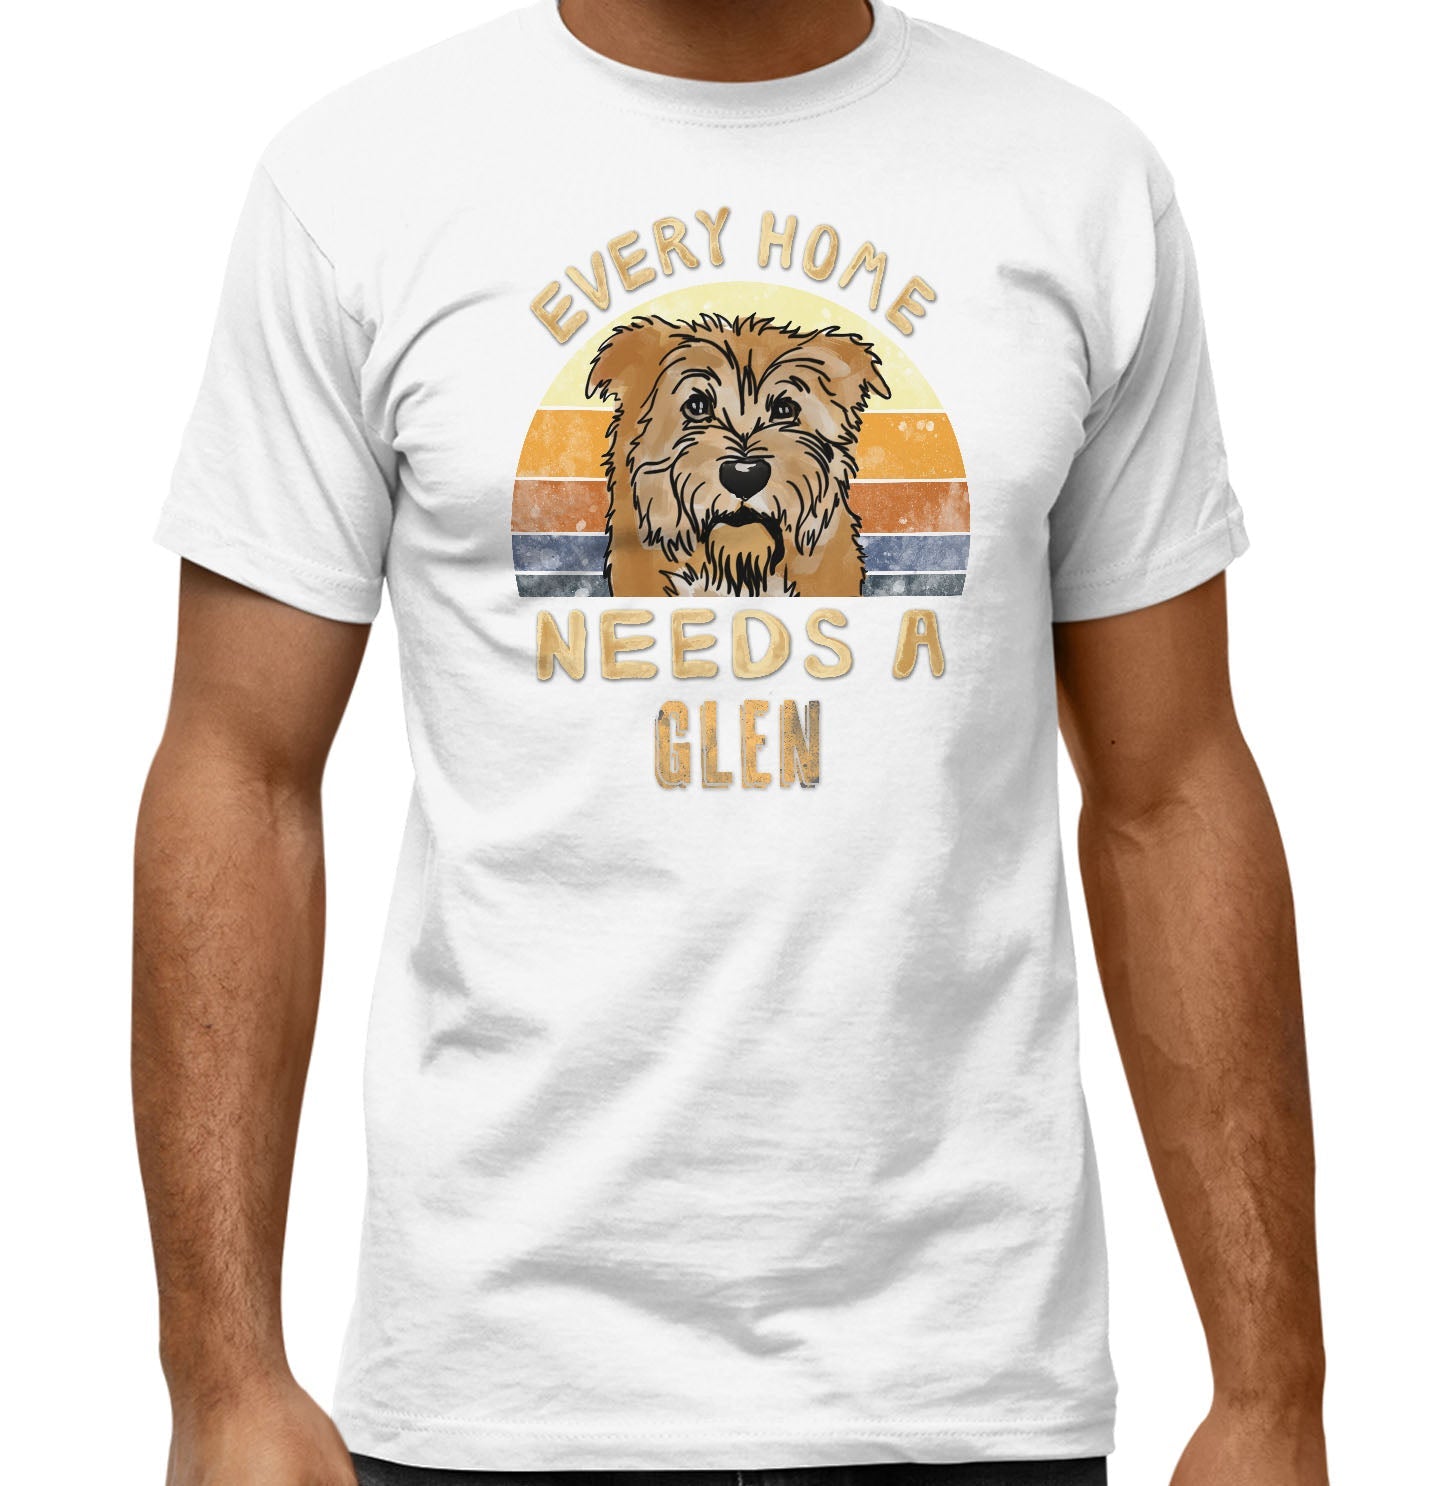 Every Home Needs a Glen of Imaal Terrier - Adult Unisex T-Shirt